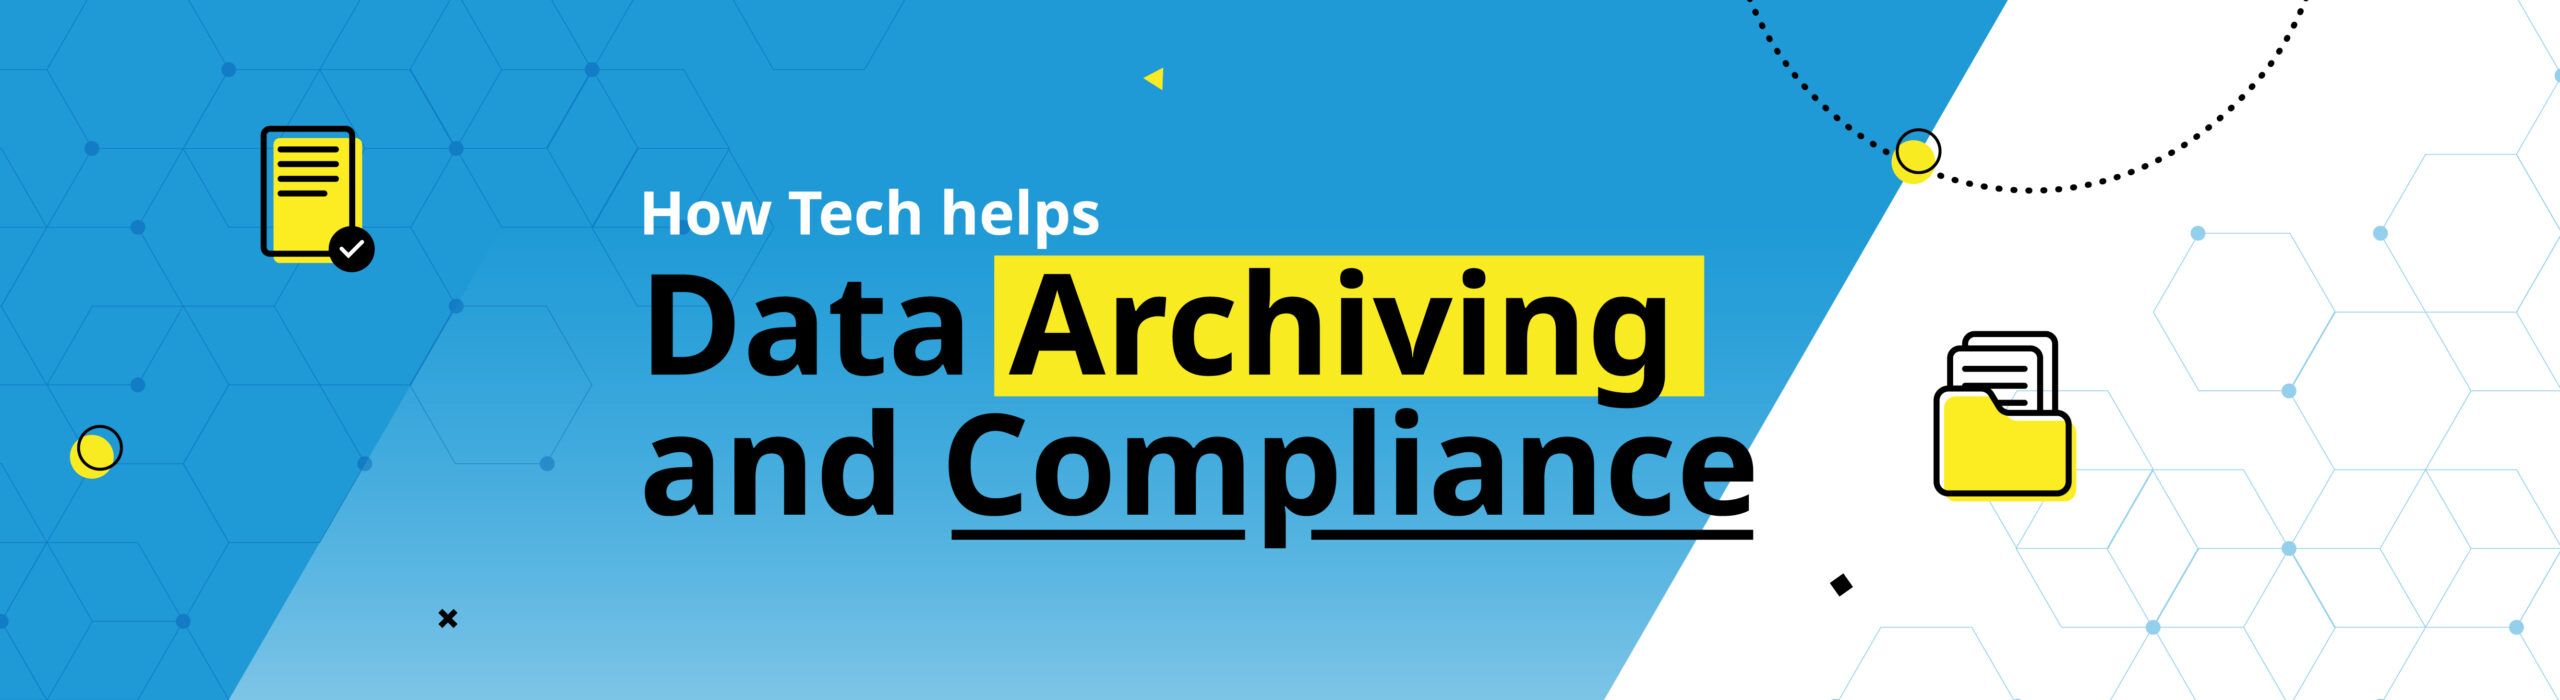 how tech helps data archiving and compliance